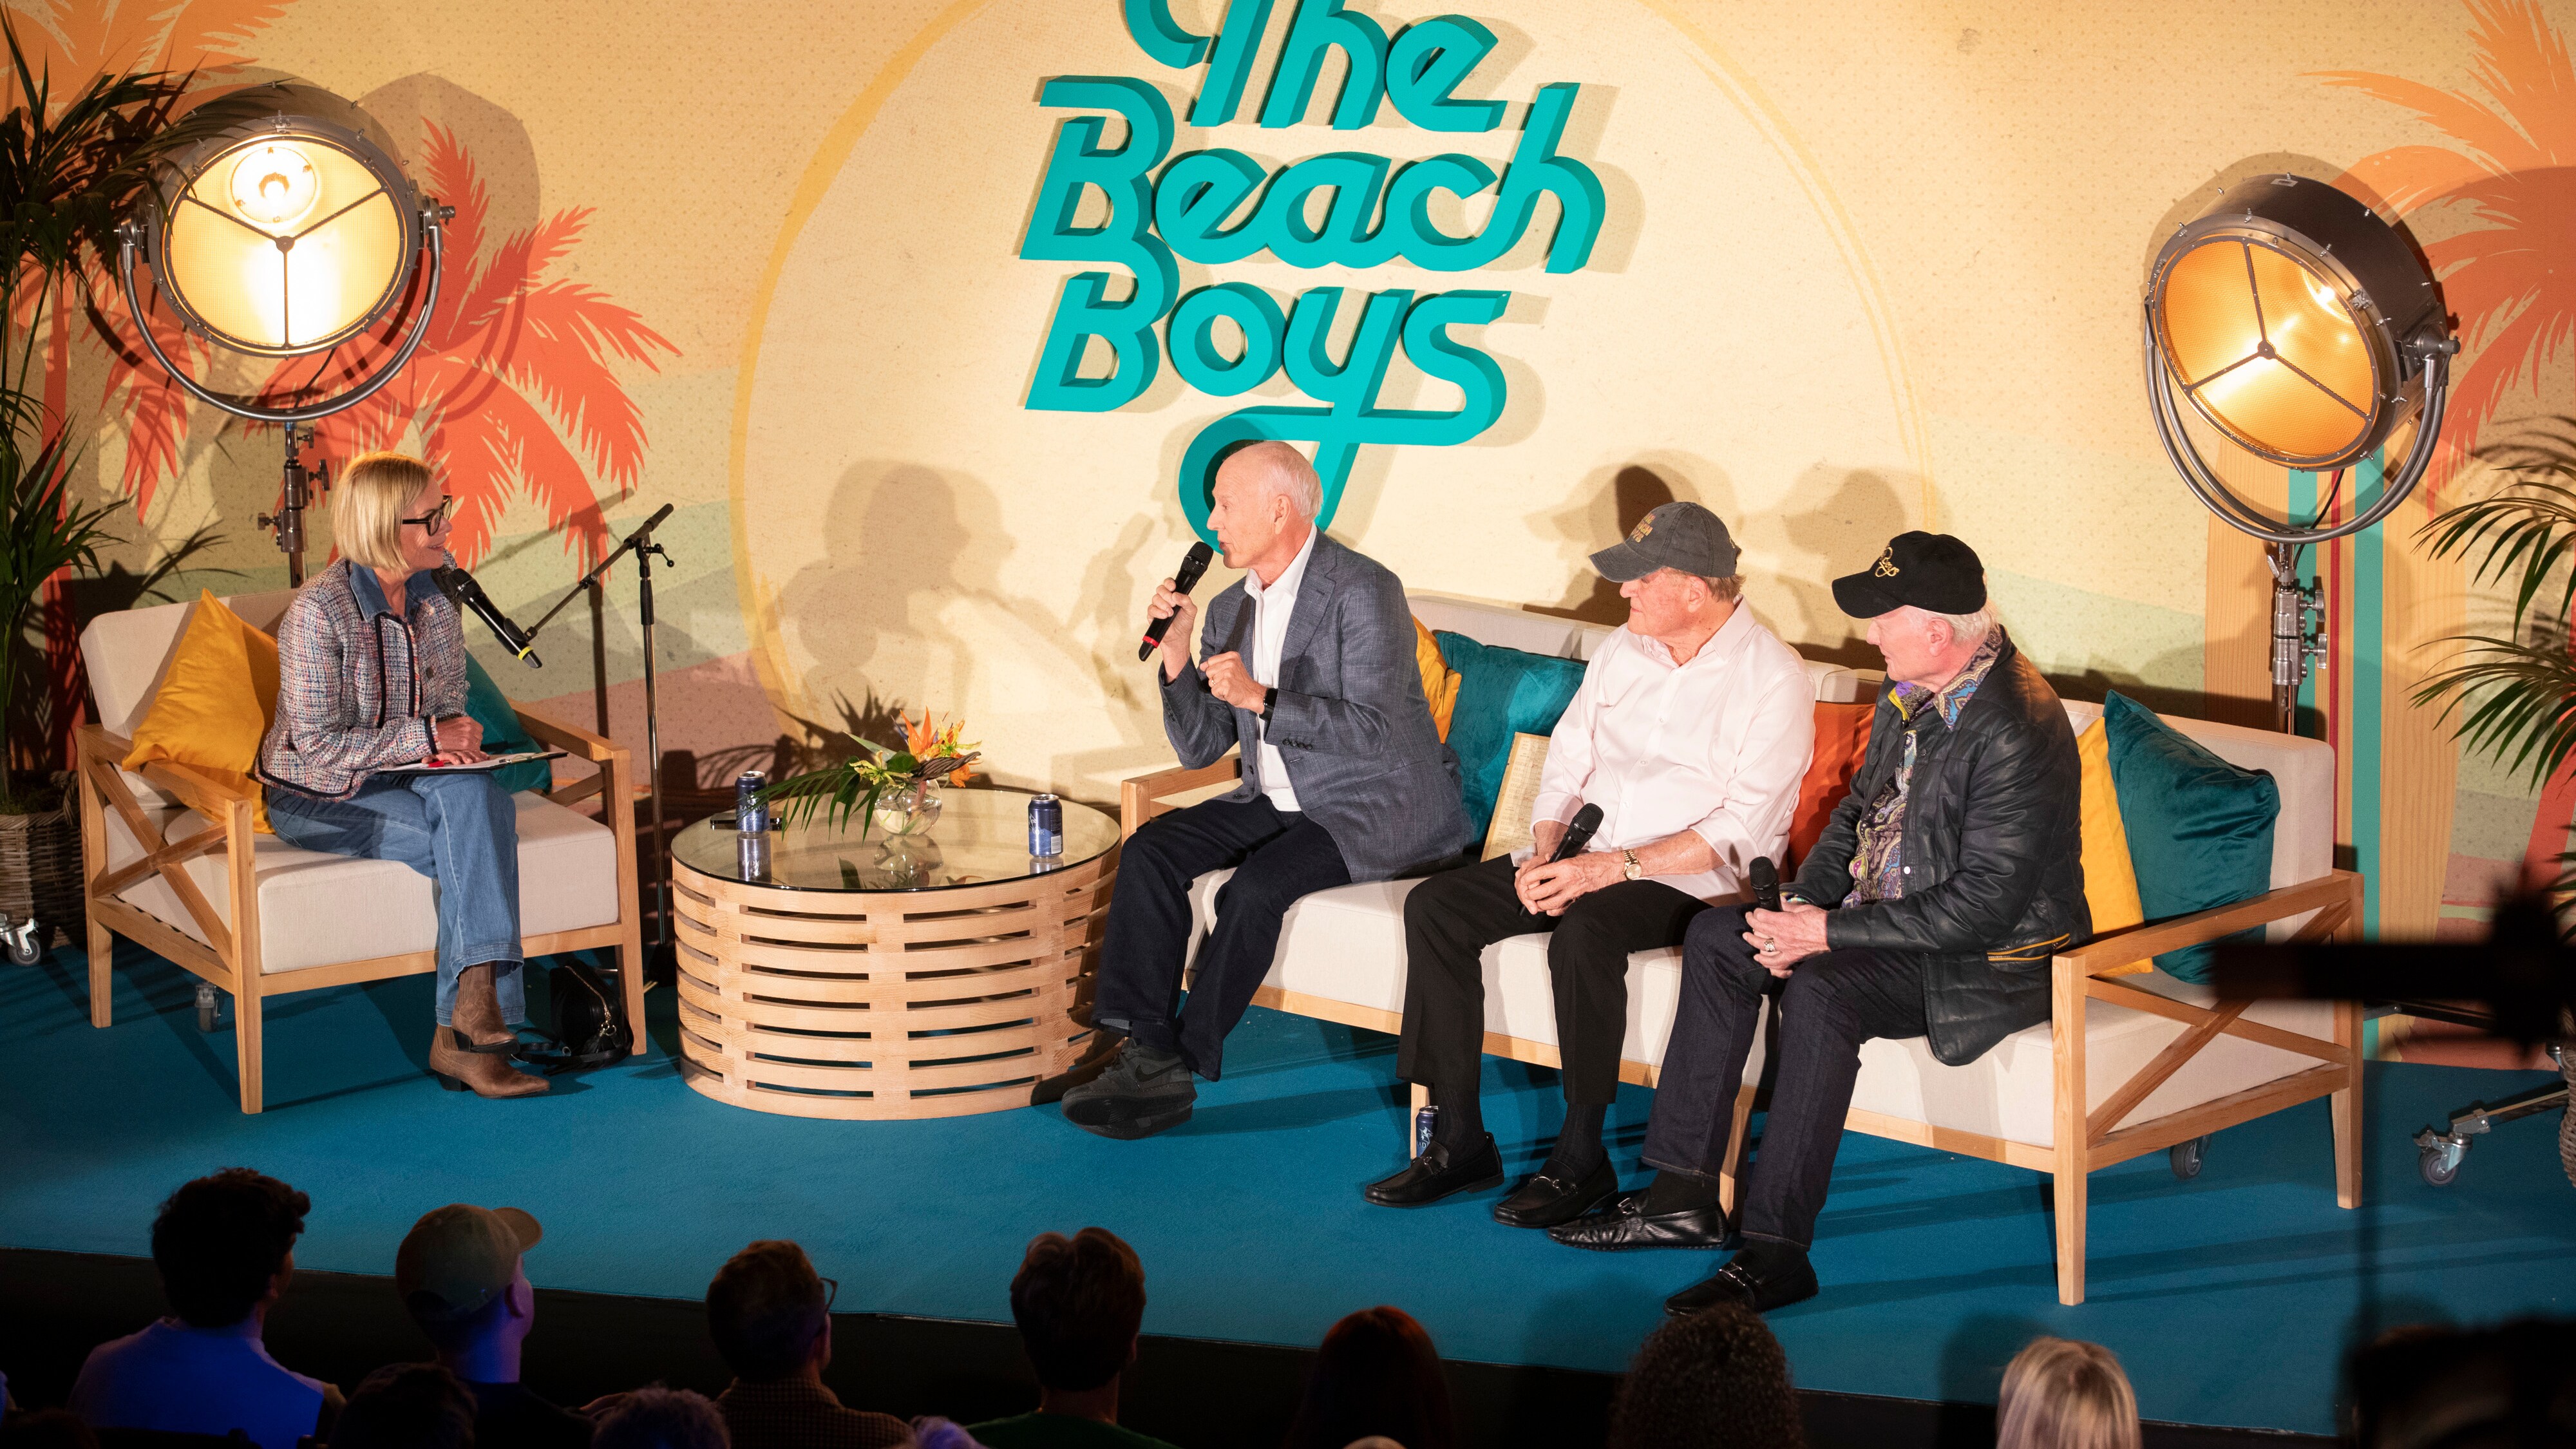 SPECIAL Q&A EVENT FOR THE BEACH BOYS AT ABBEY ROAD STUDIOS